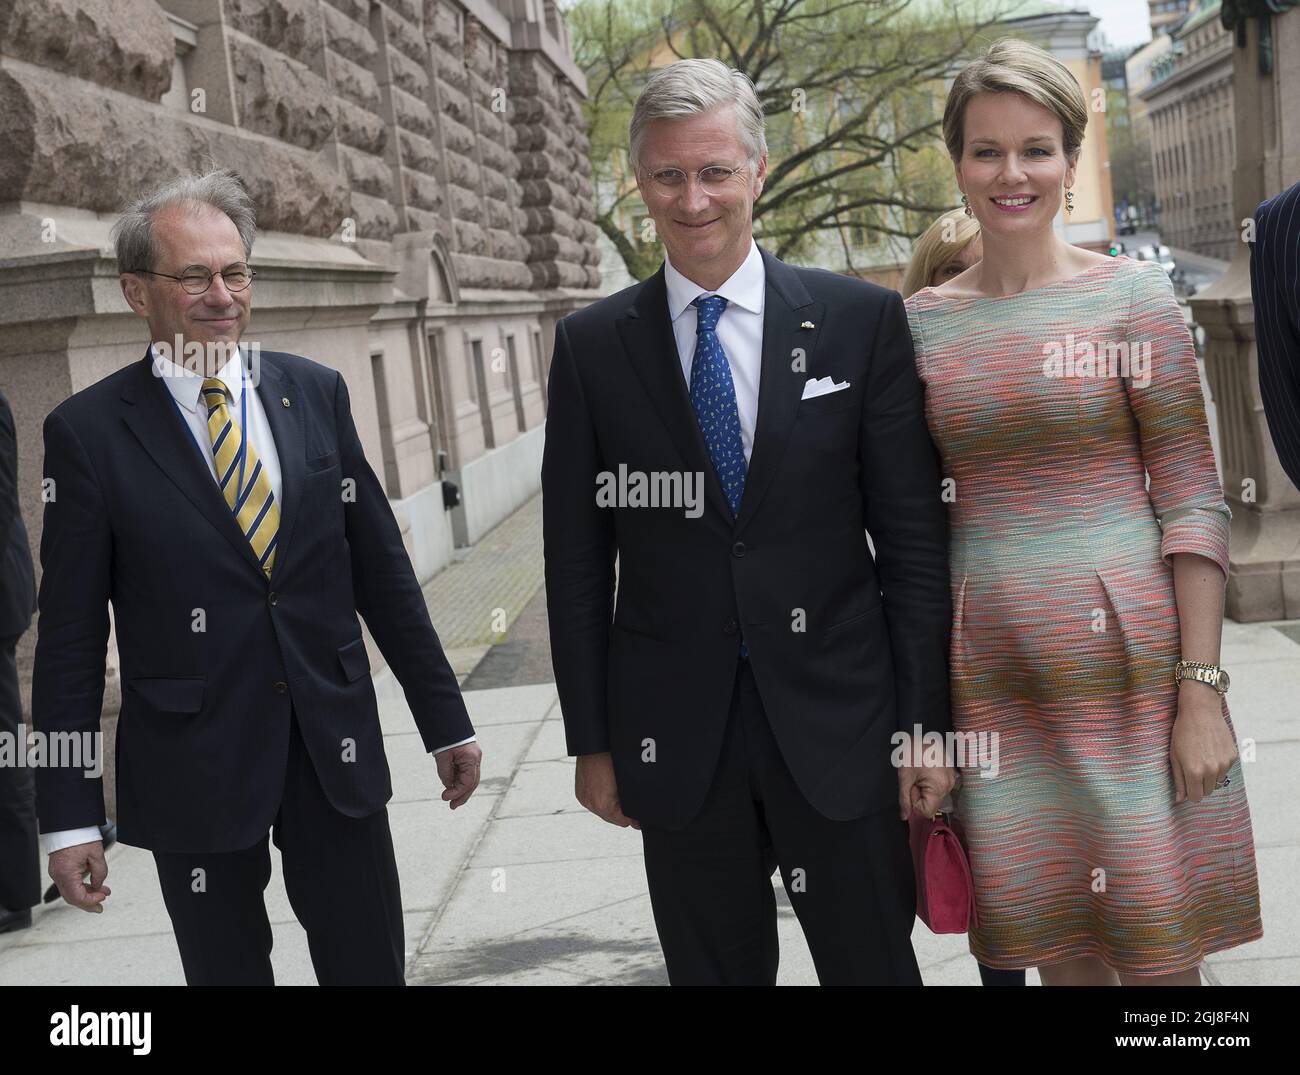 STOCKHOLM 2014-04-29 The Belgian royal couple King Philippe and Queen Mathilde met with Sweden's Speaker of the House Per Westerberg at the Parliament building in Stockholm, Sweden, April 29, 2014. The Belgian Royals are on a visit to Sweden. Foto Jonas Ekstromer / TT / kod 10030  Stock Photo